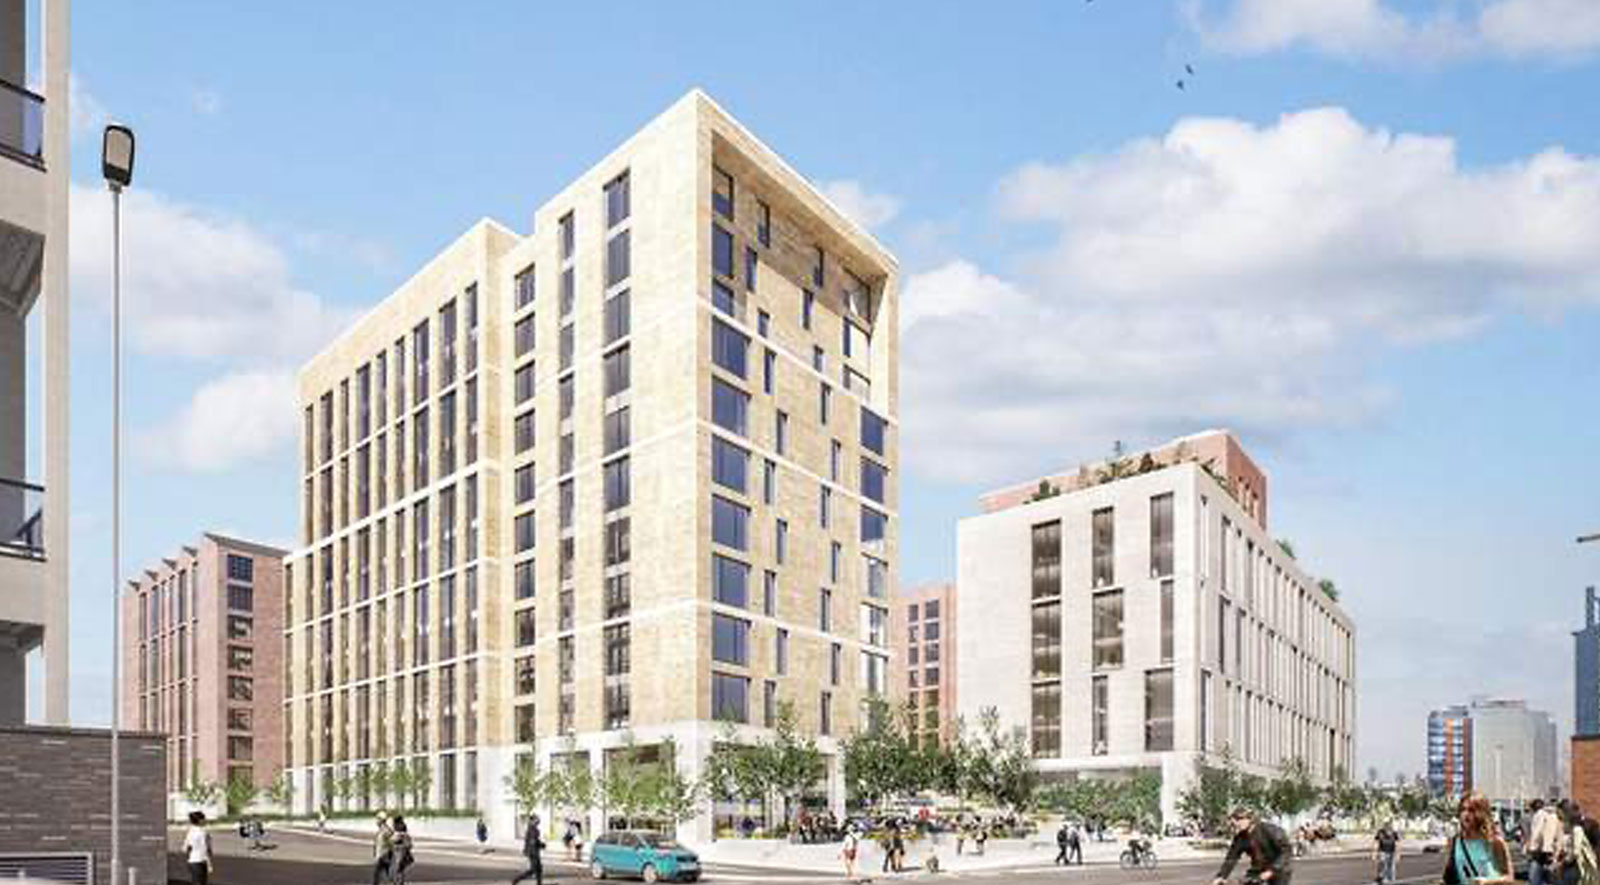 Plans submitted for major Glasgow development offering 730 rental homes